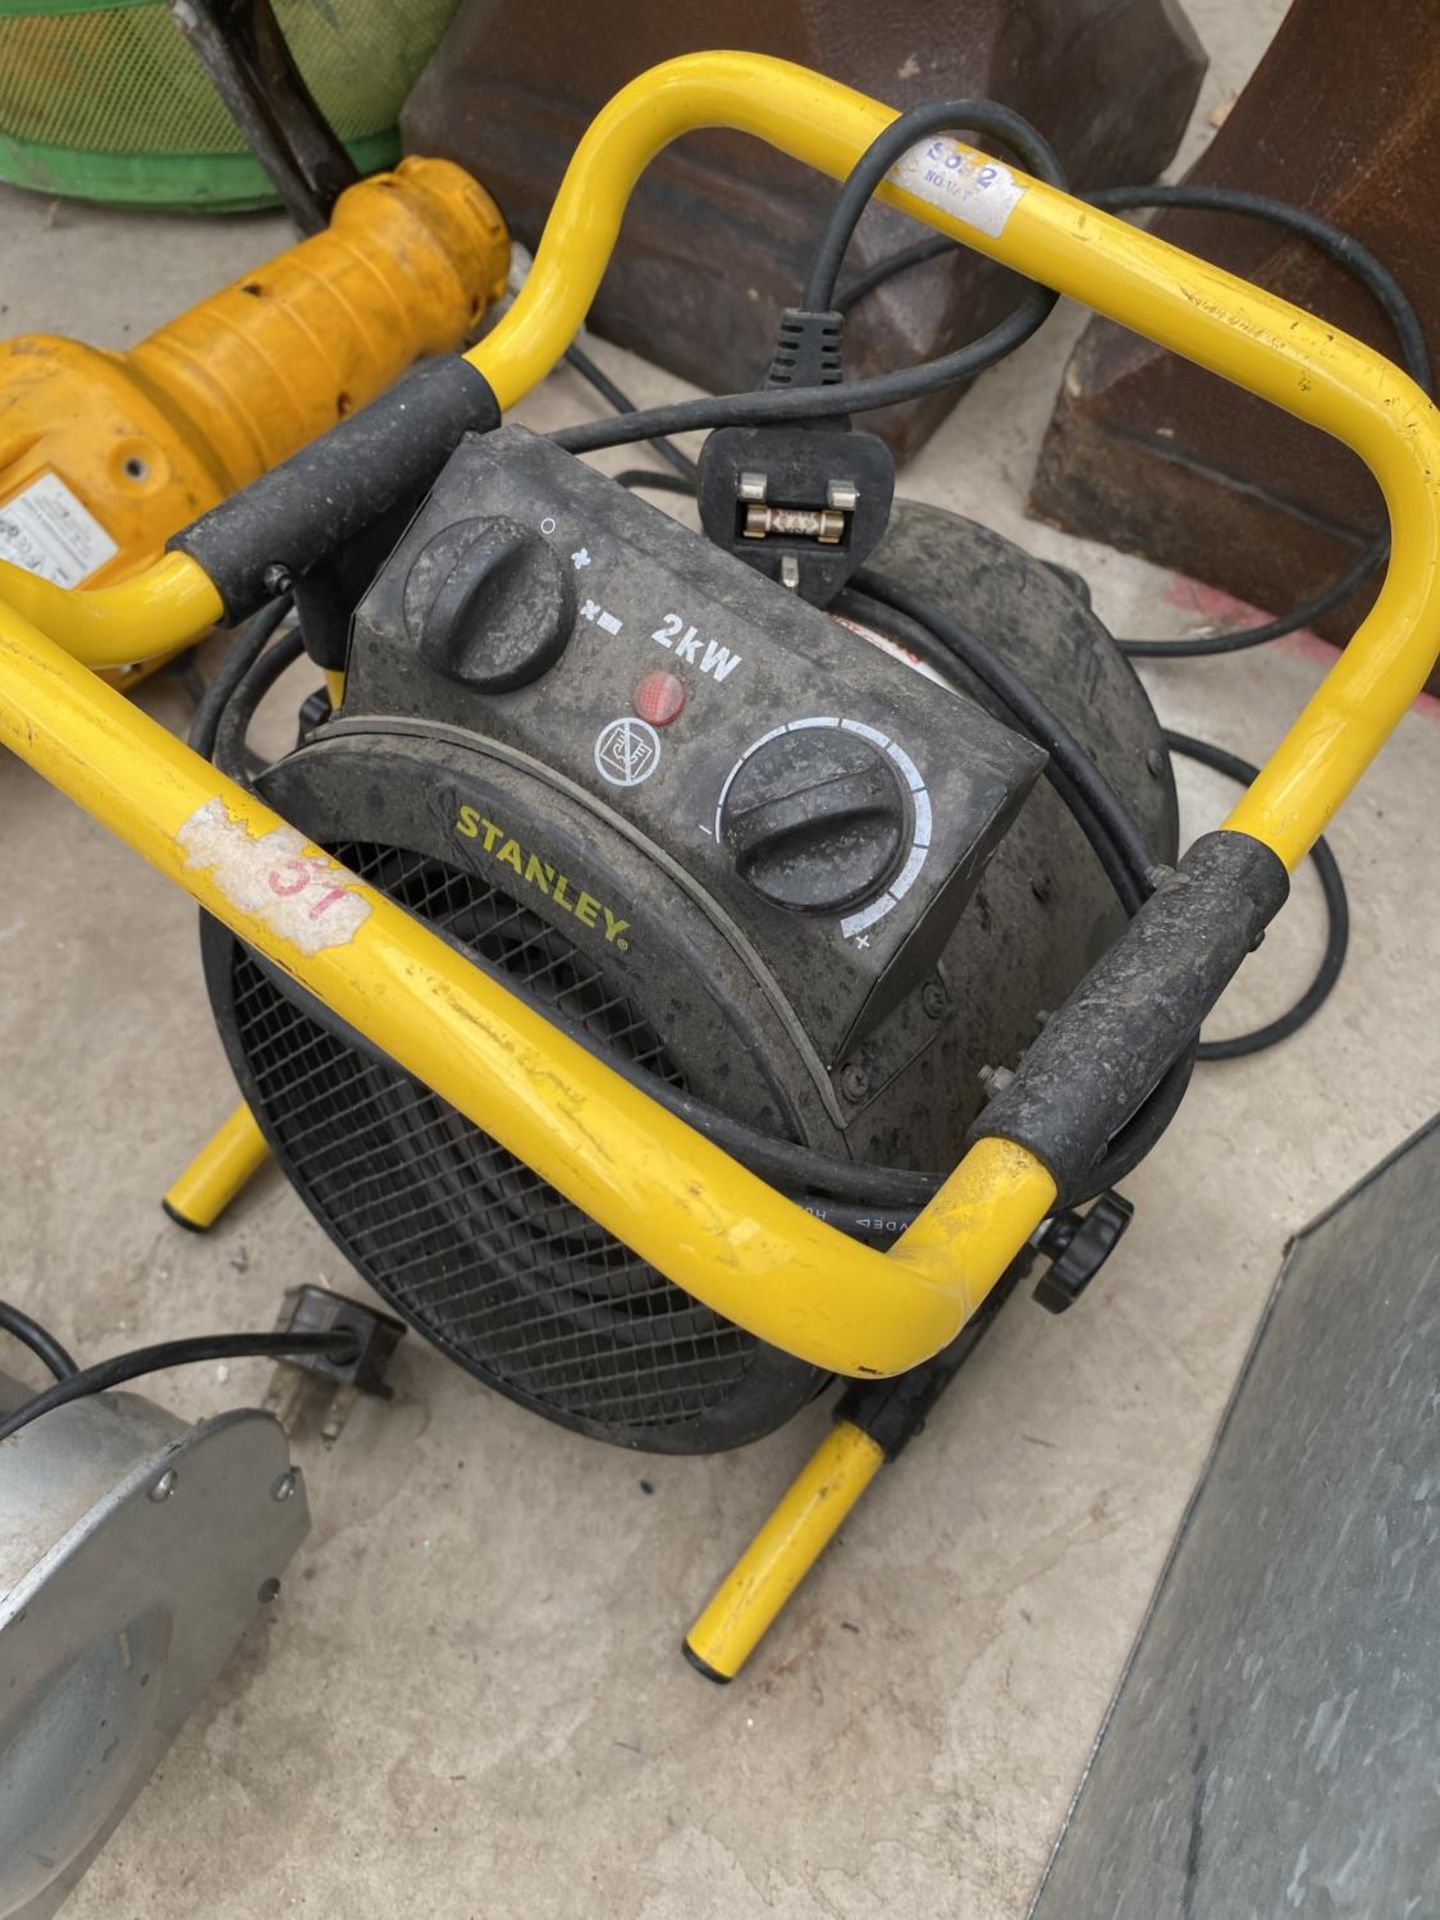 A HLKA 6" BENCH GRINDER, A STANLEY HEATER AND A WORK LIGHT - Image 4 of 6